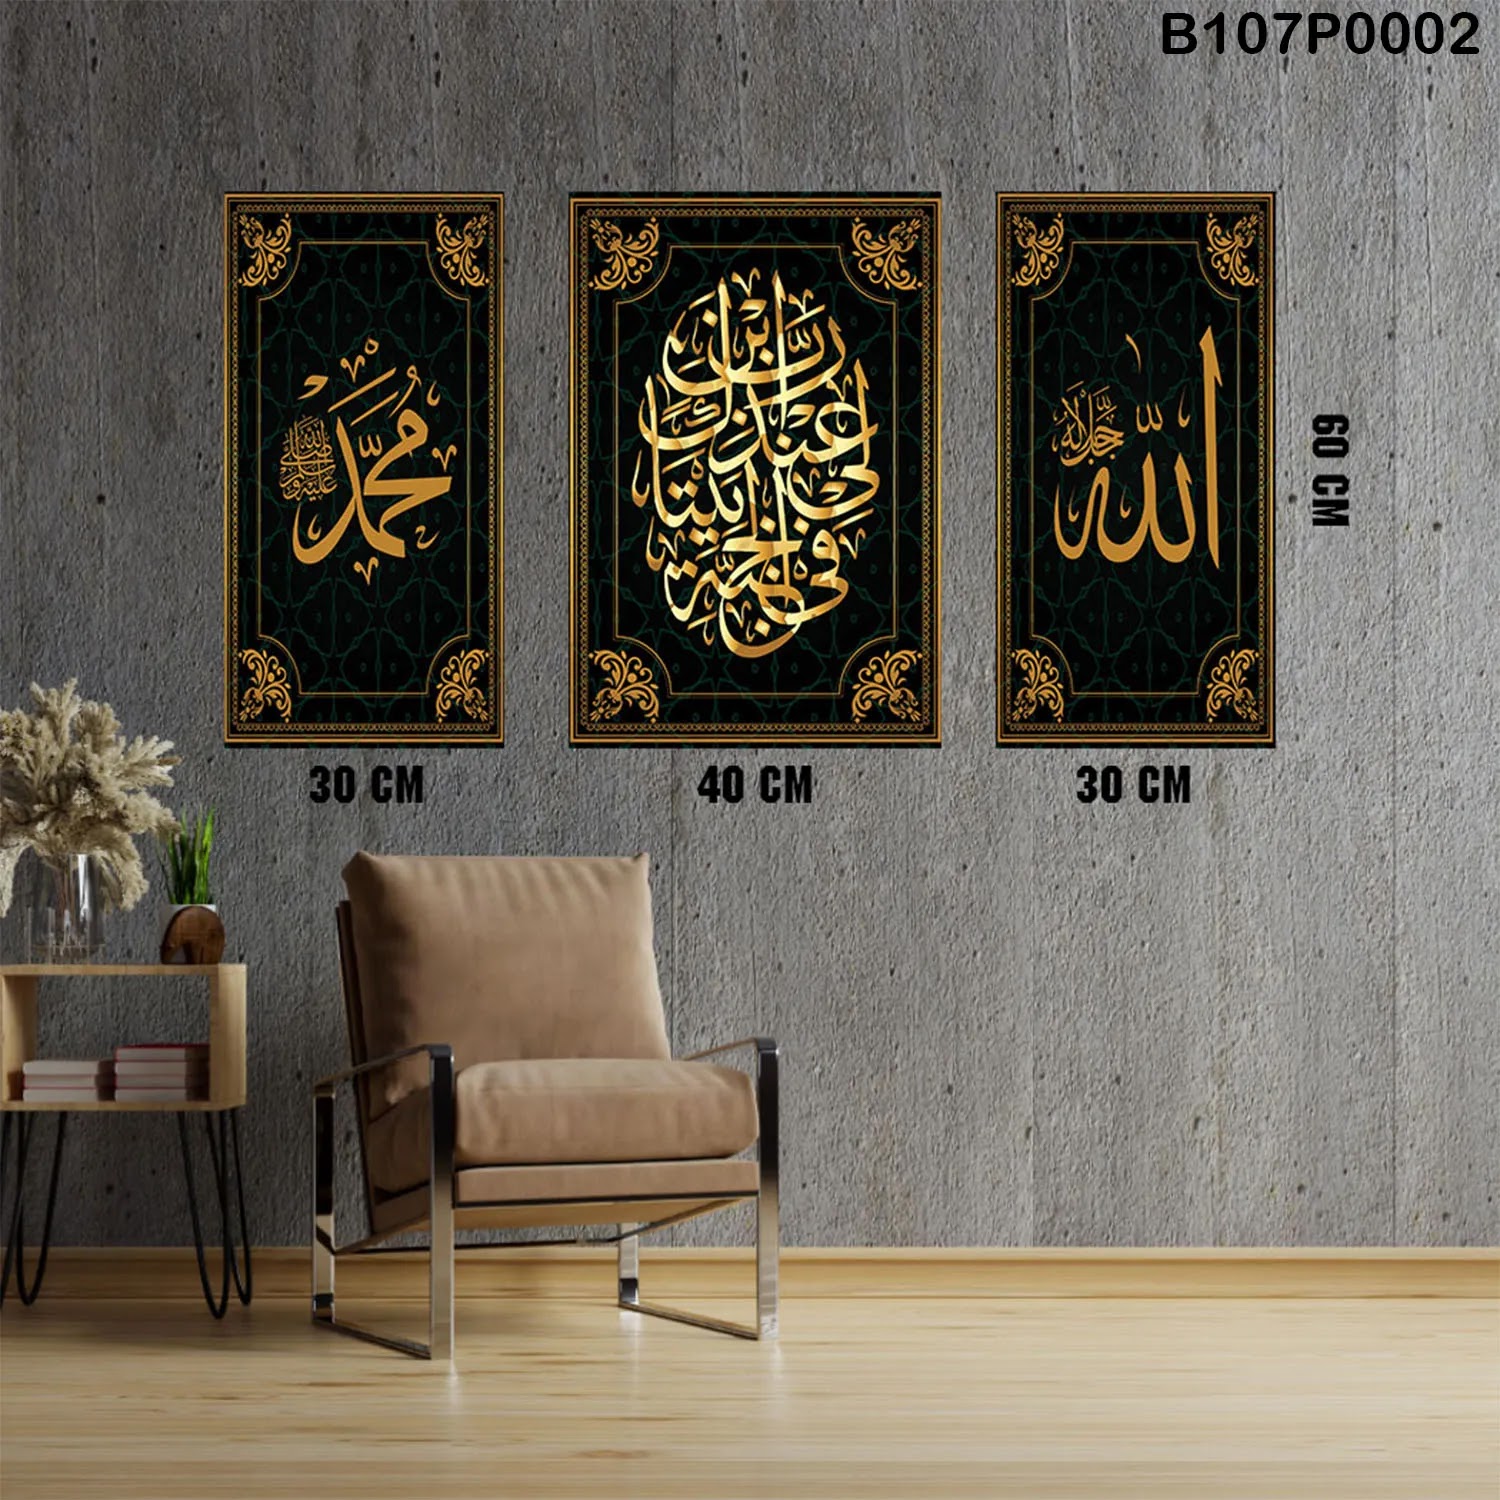 Black Triptych panel with gold Arabic calligraphy (Allah - Quran - Mohammad)